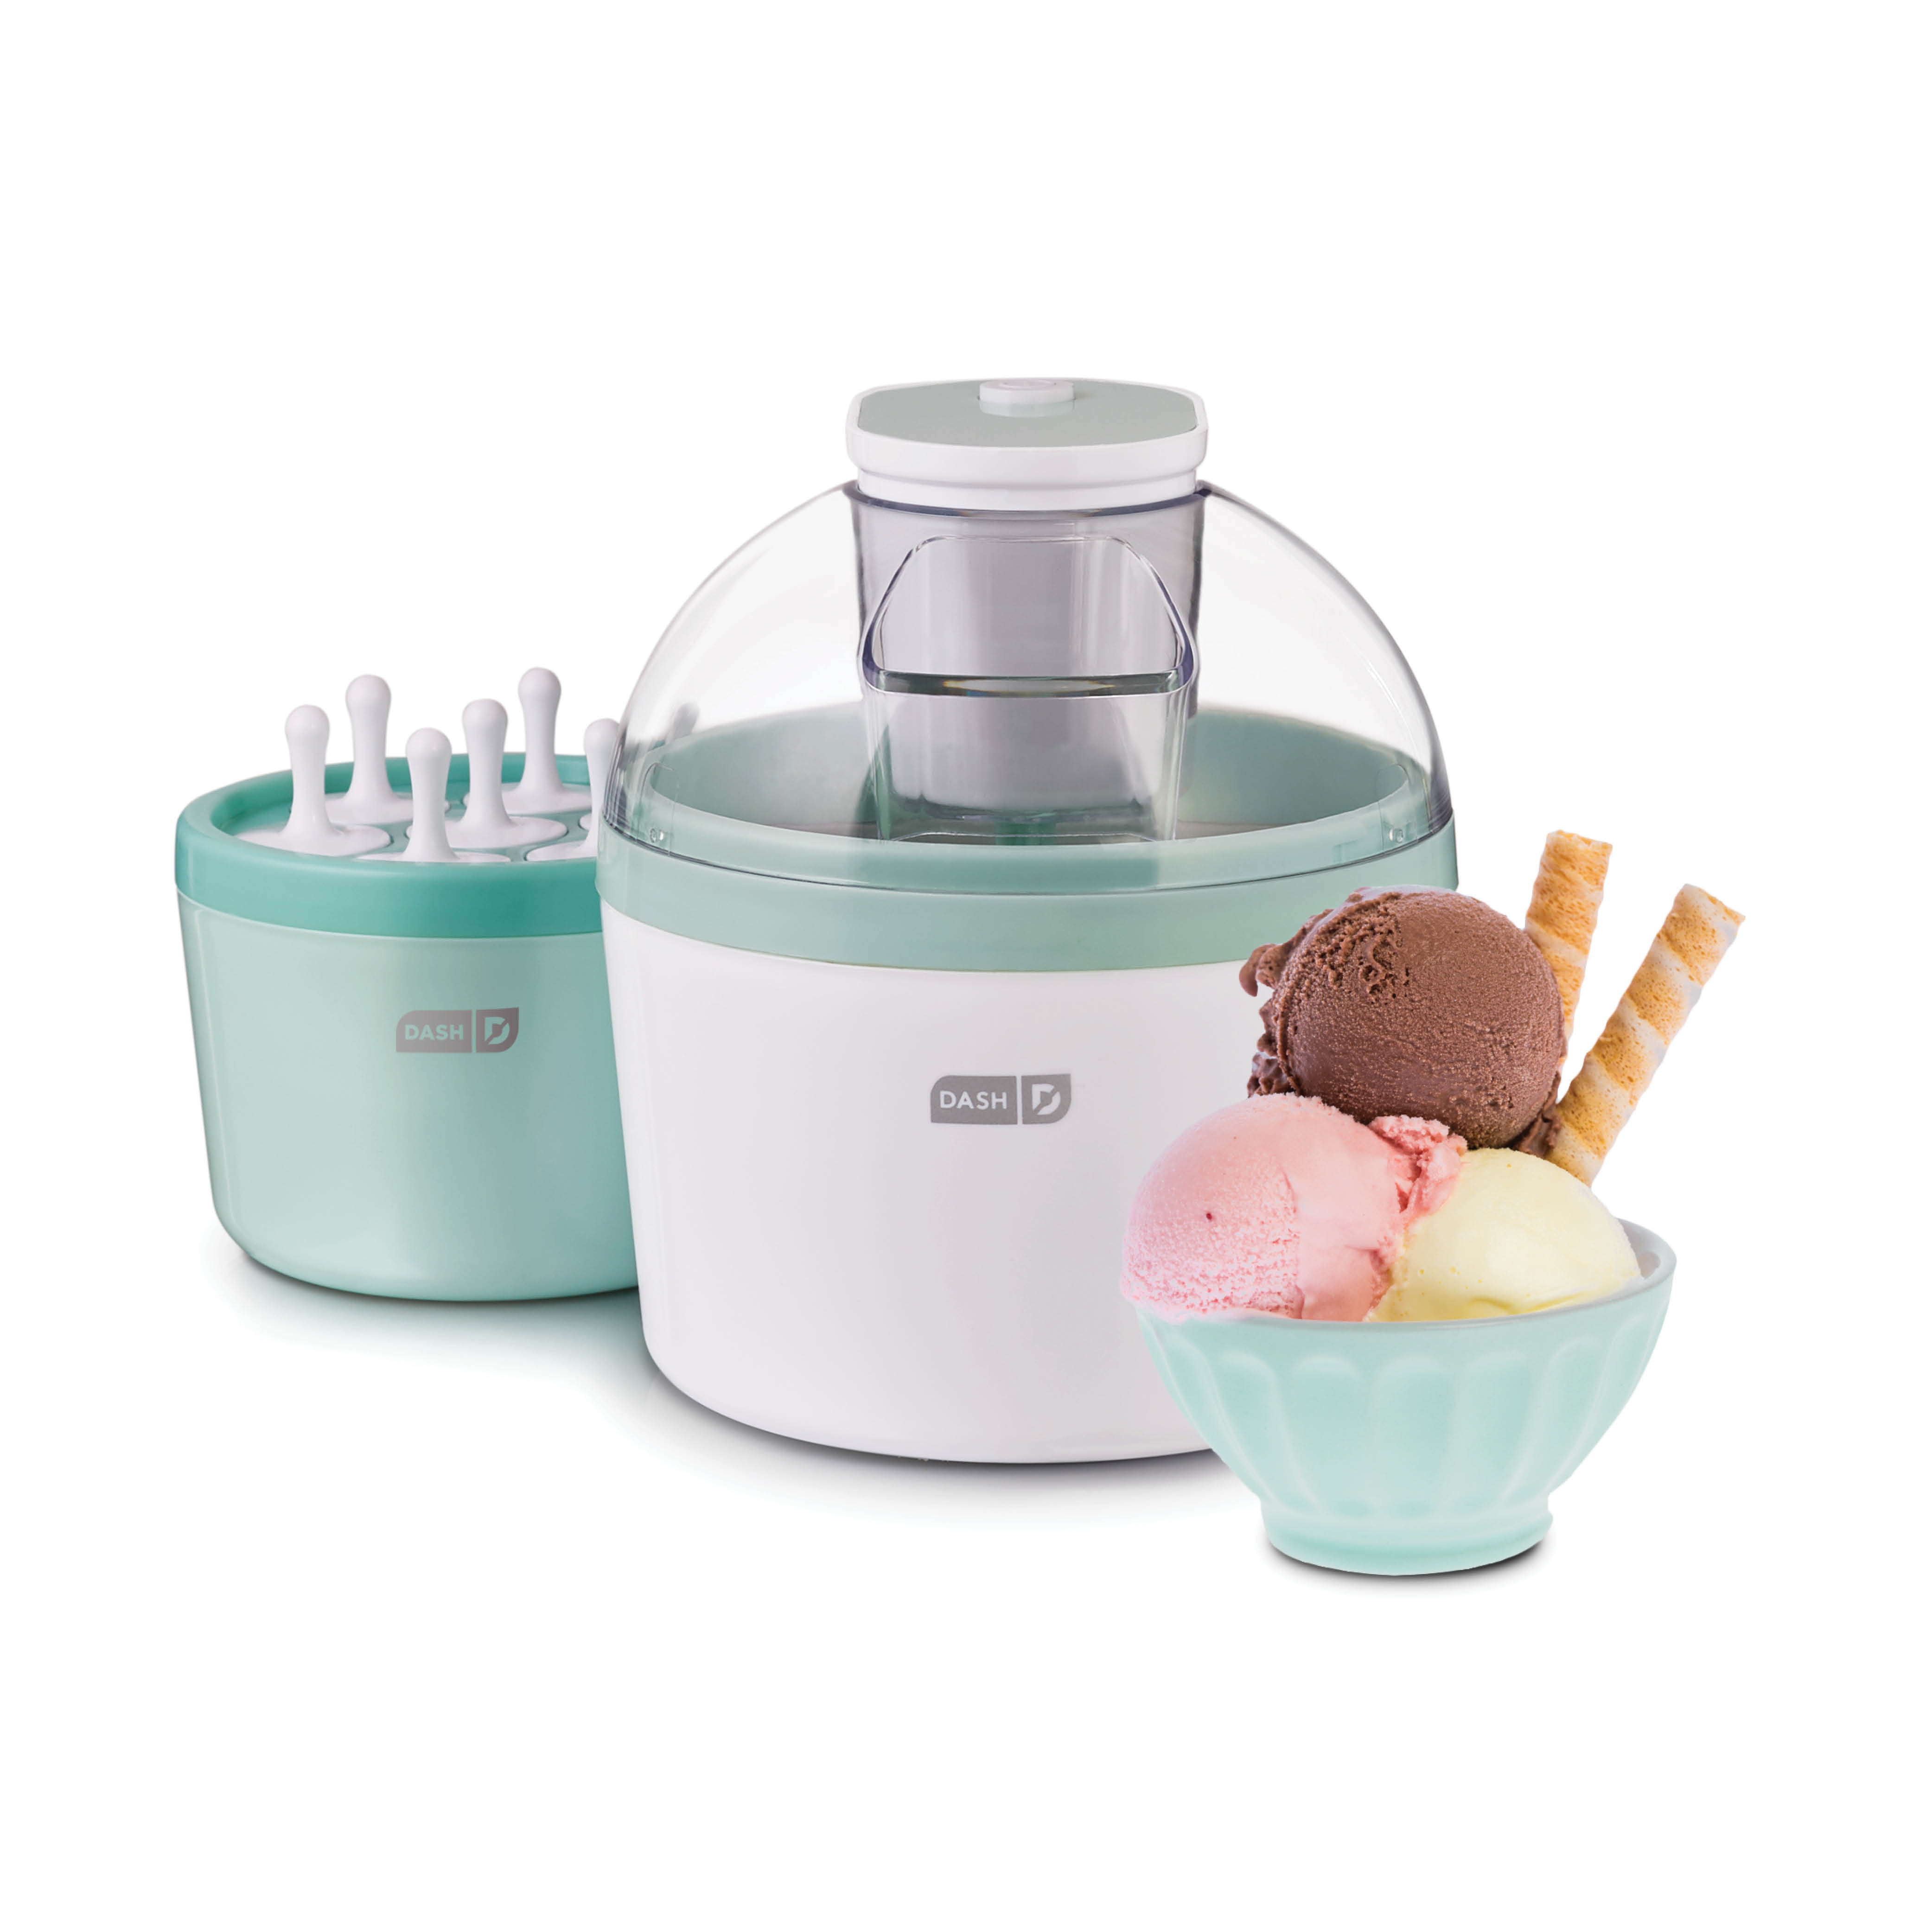 Dash Everyday Ice Cream Maker with Mixing Bowl & Ice Pop Molds + Recipe Book, 1 Quart, 5.1 lbs - image 1 of 5